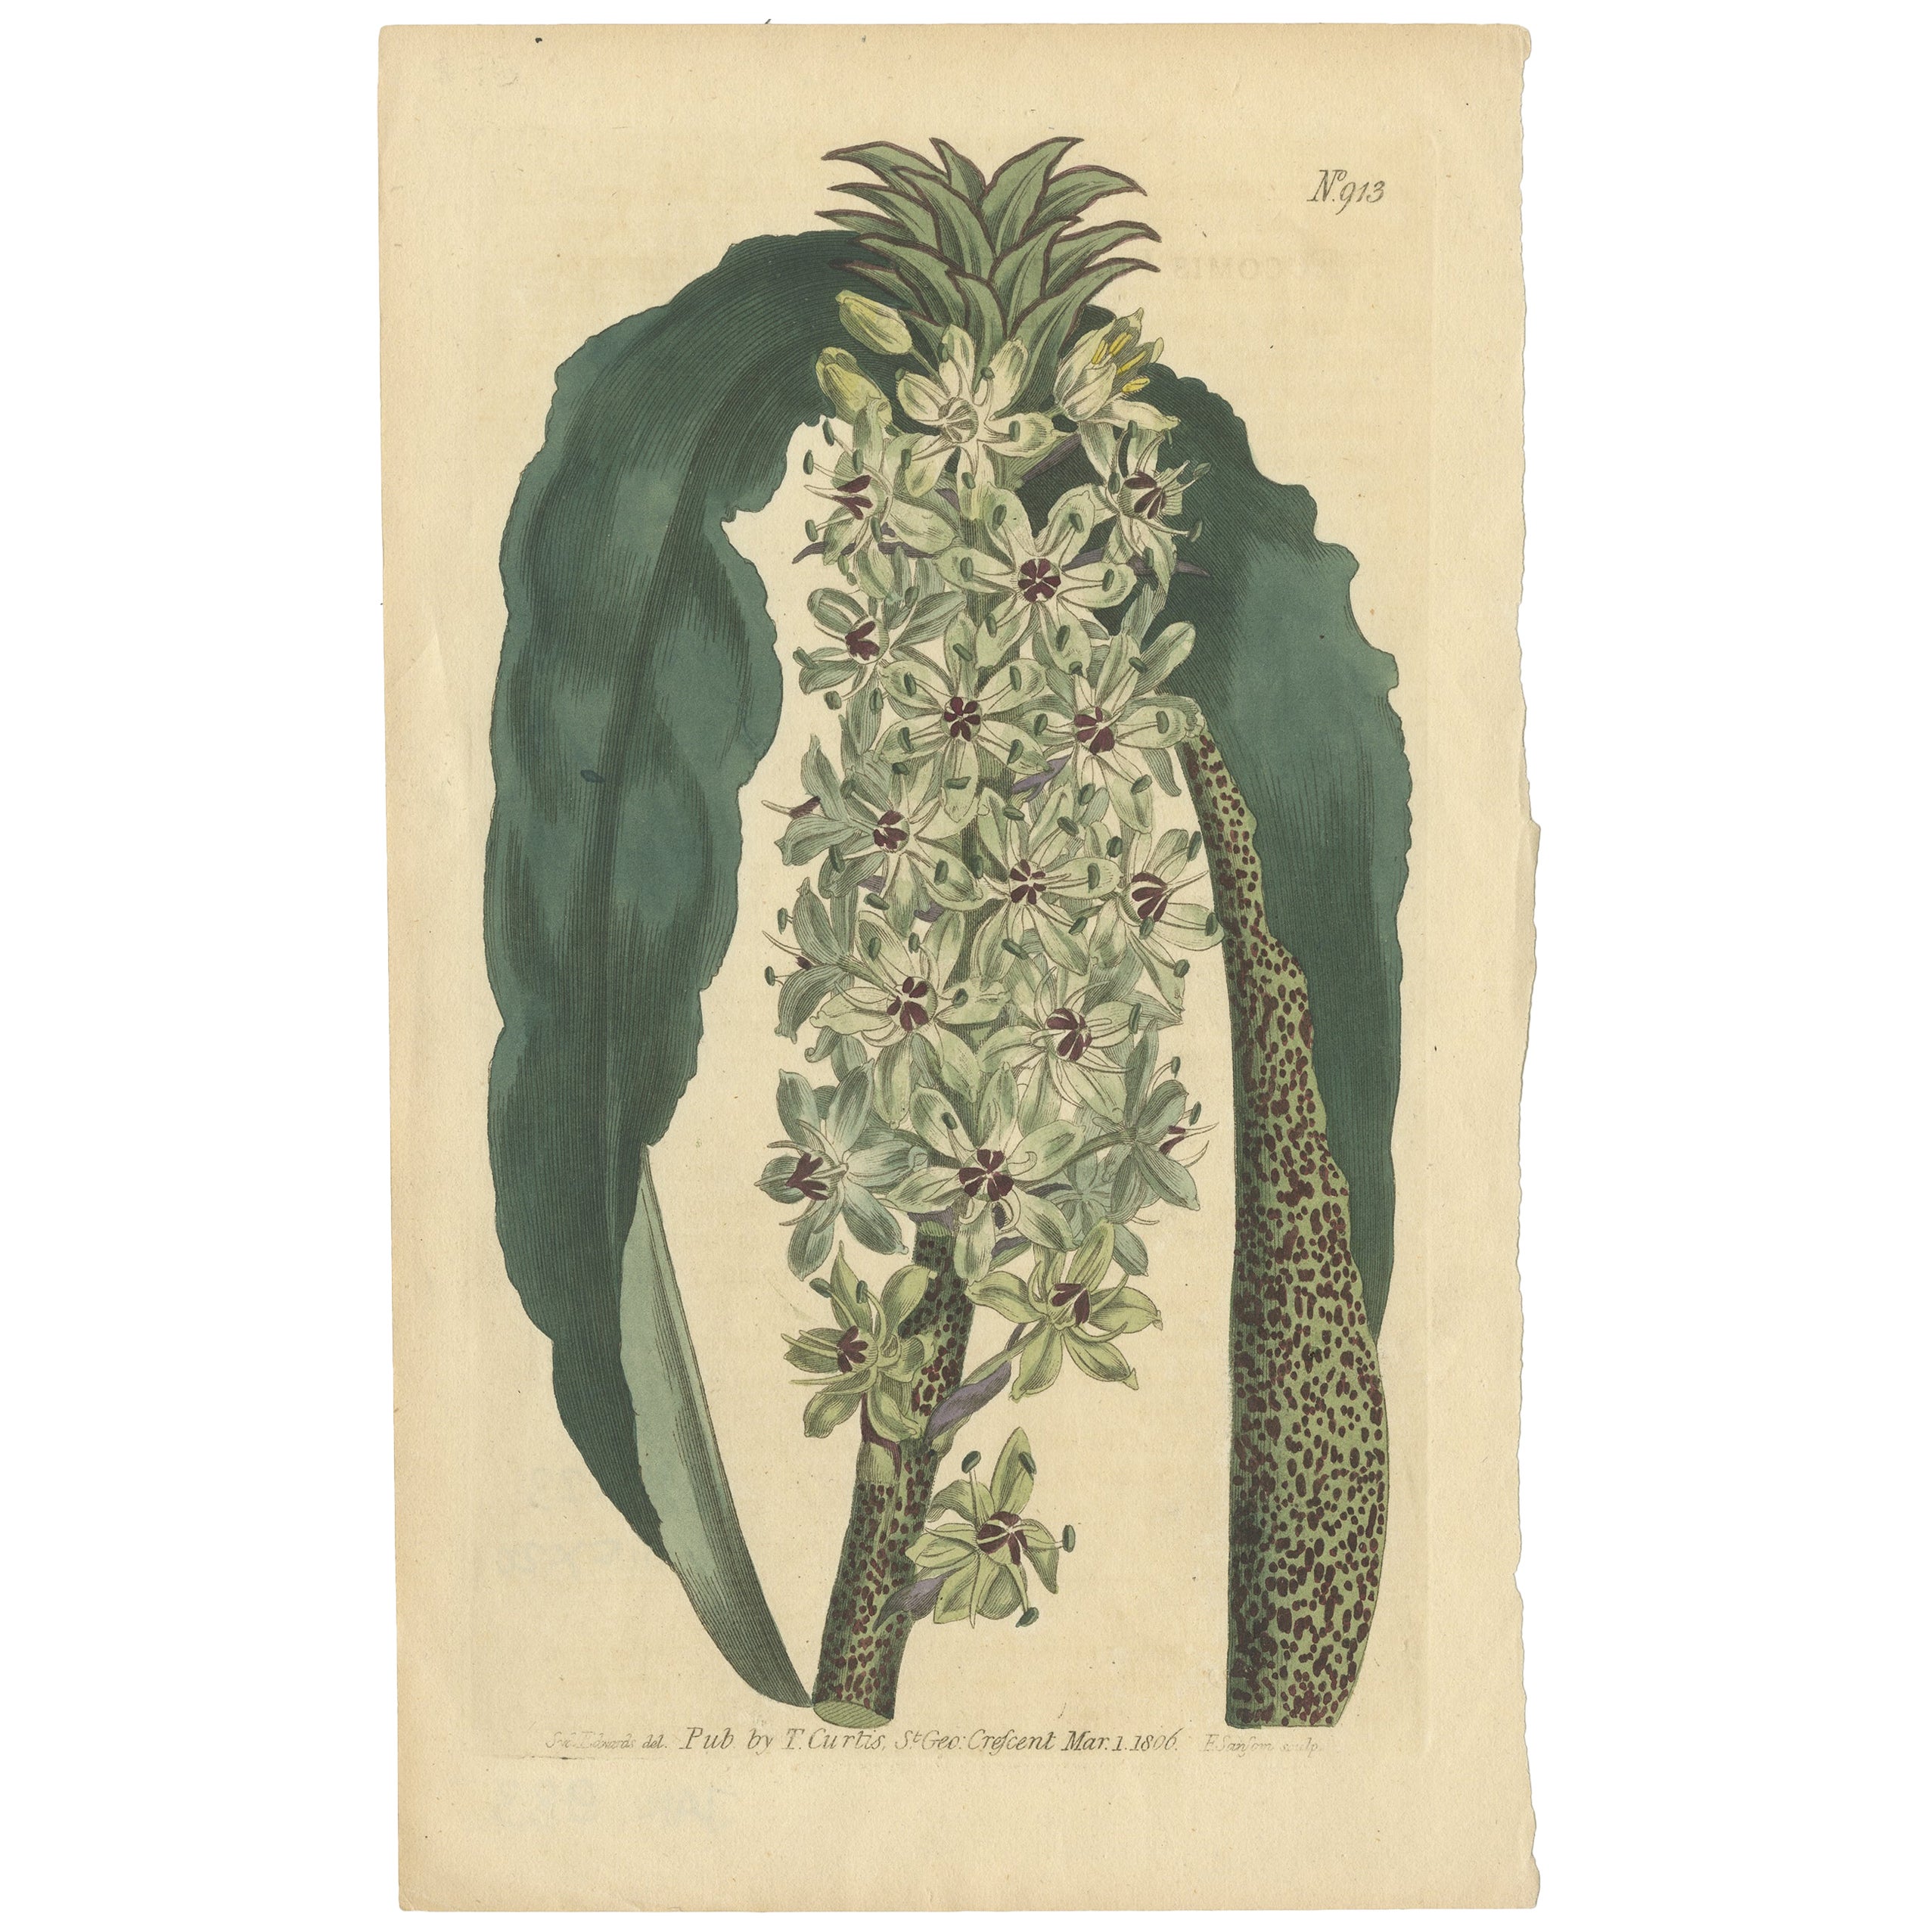 Antique Print of the Pineapple Flower or Pineapple Lily or Wine Eucomis, 1806